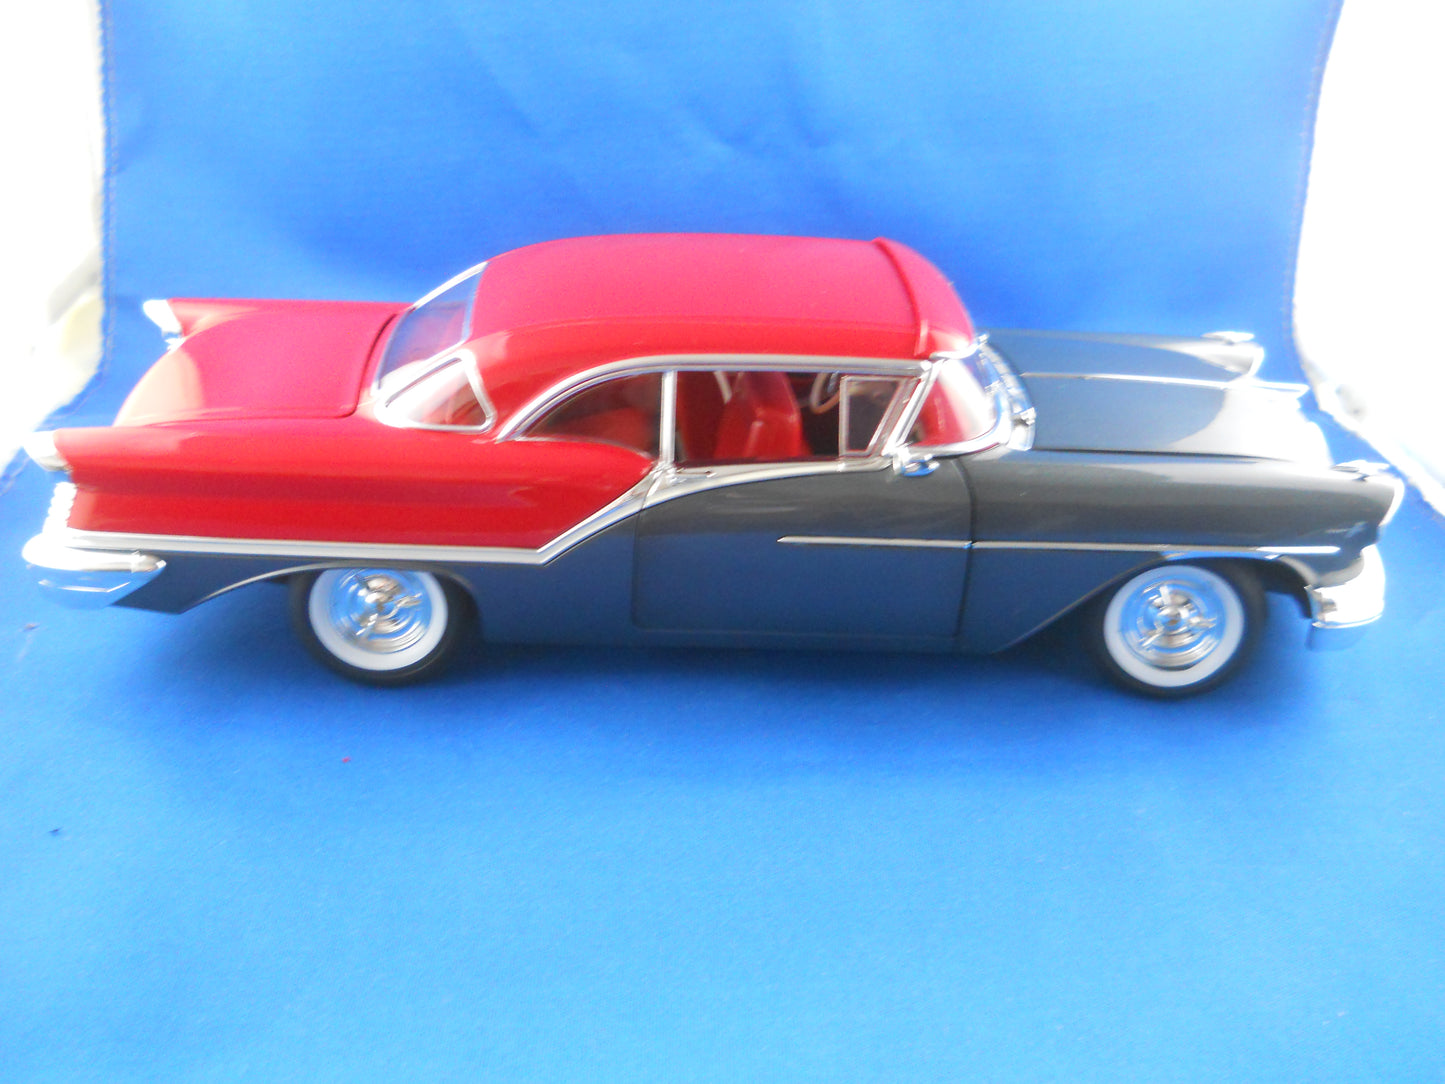 Acme 1957 Oldsmobile Super 88 1:18 Diecast Limited Edition 1 of 762